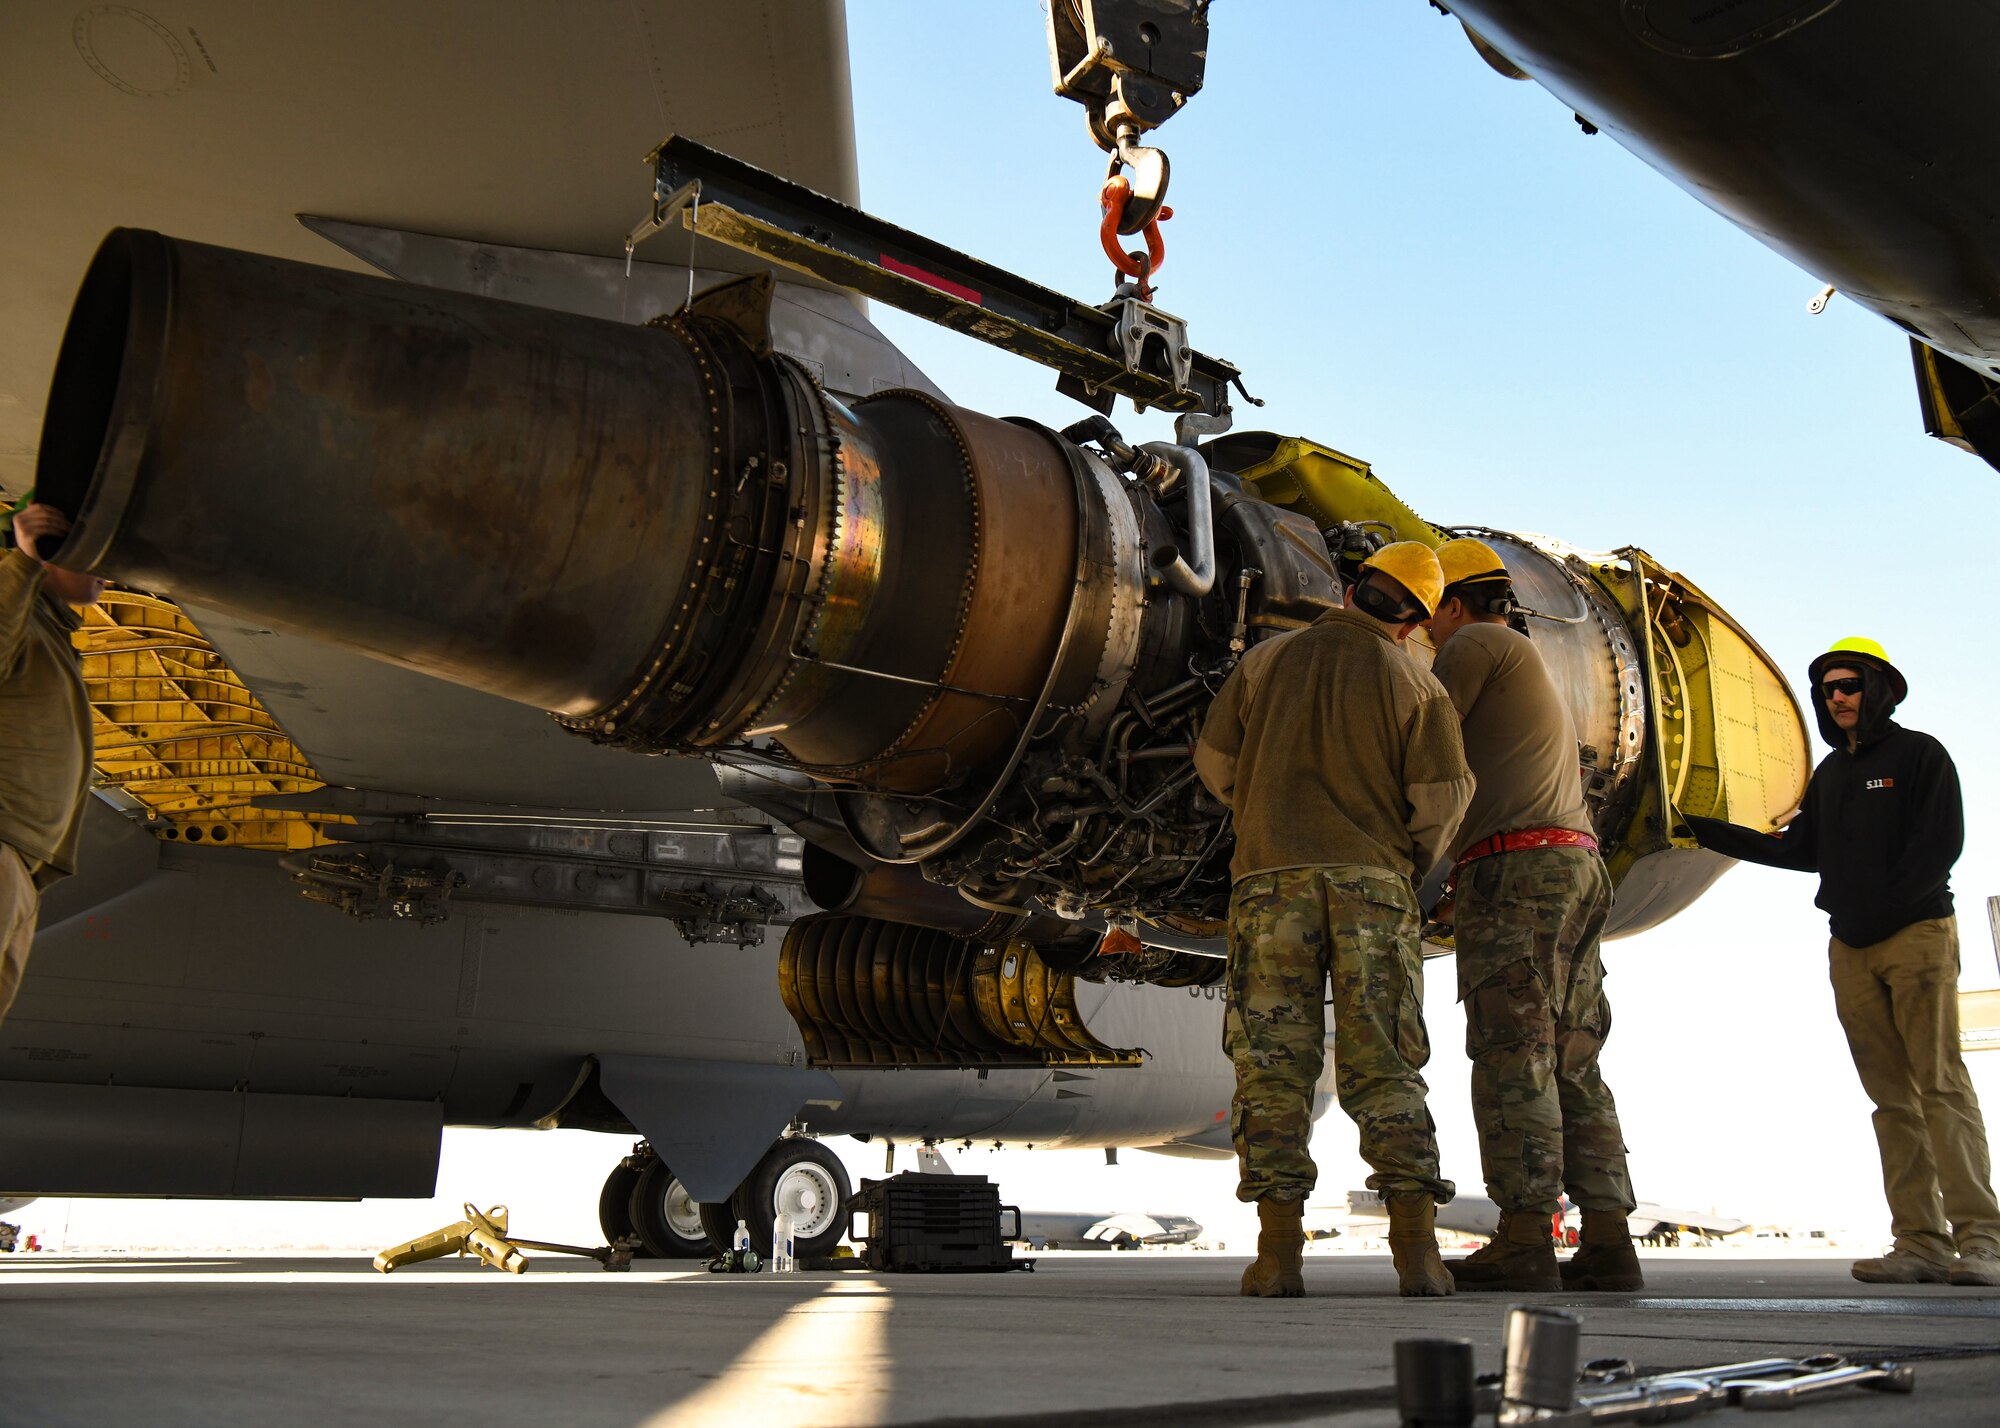 Airmen replace an engine on a B-52